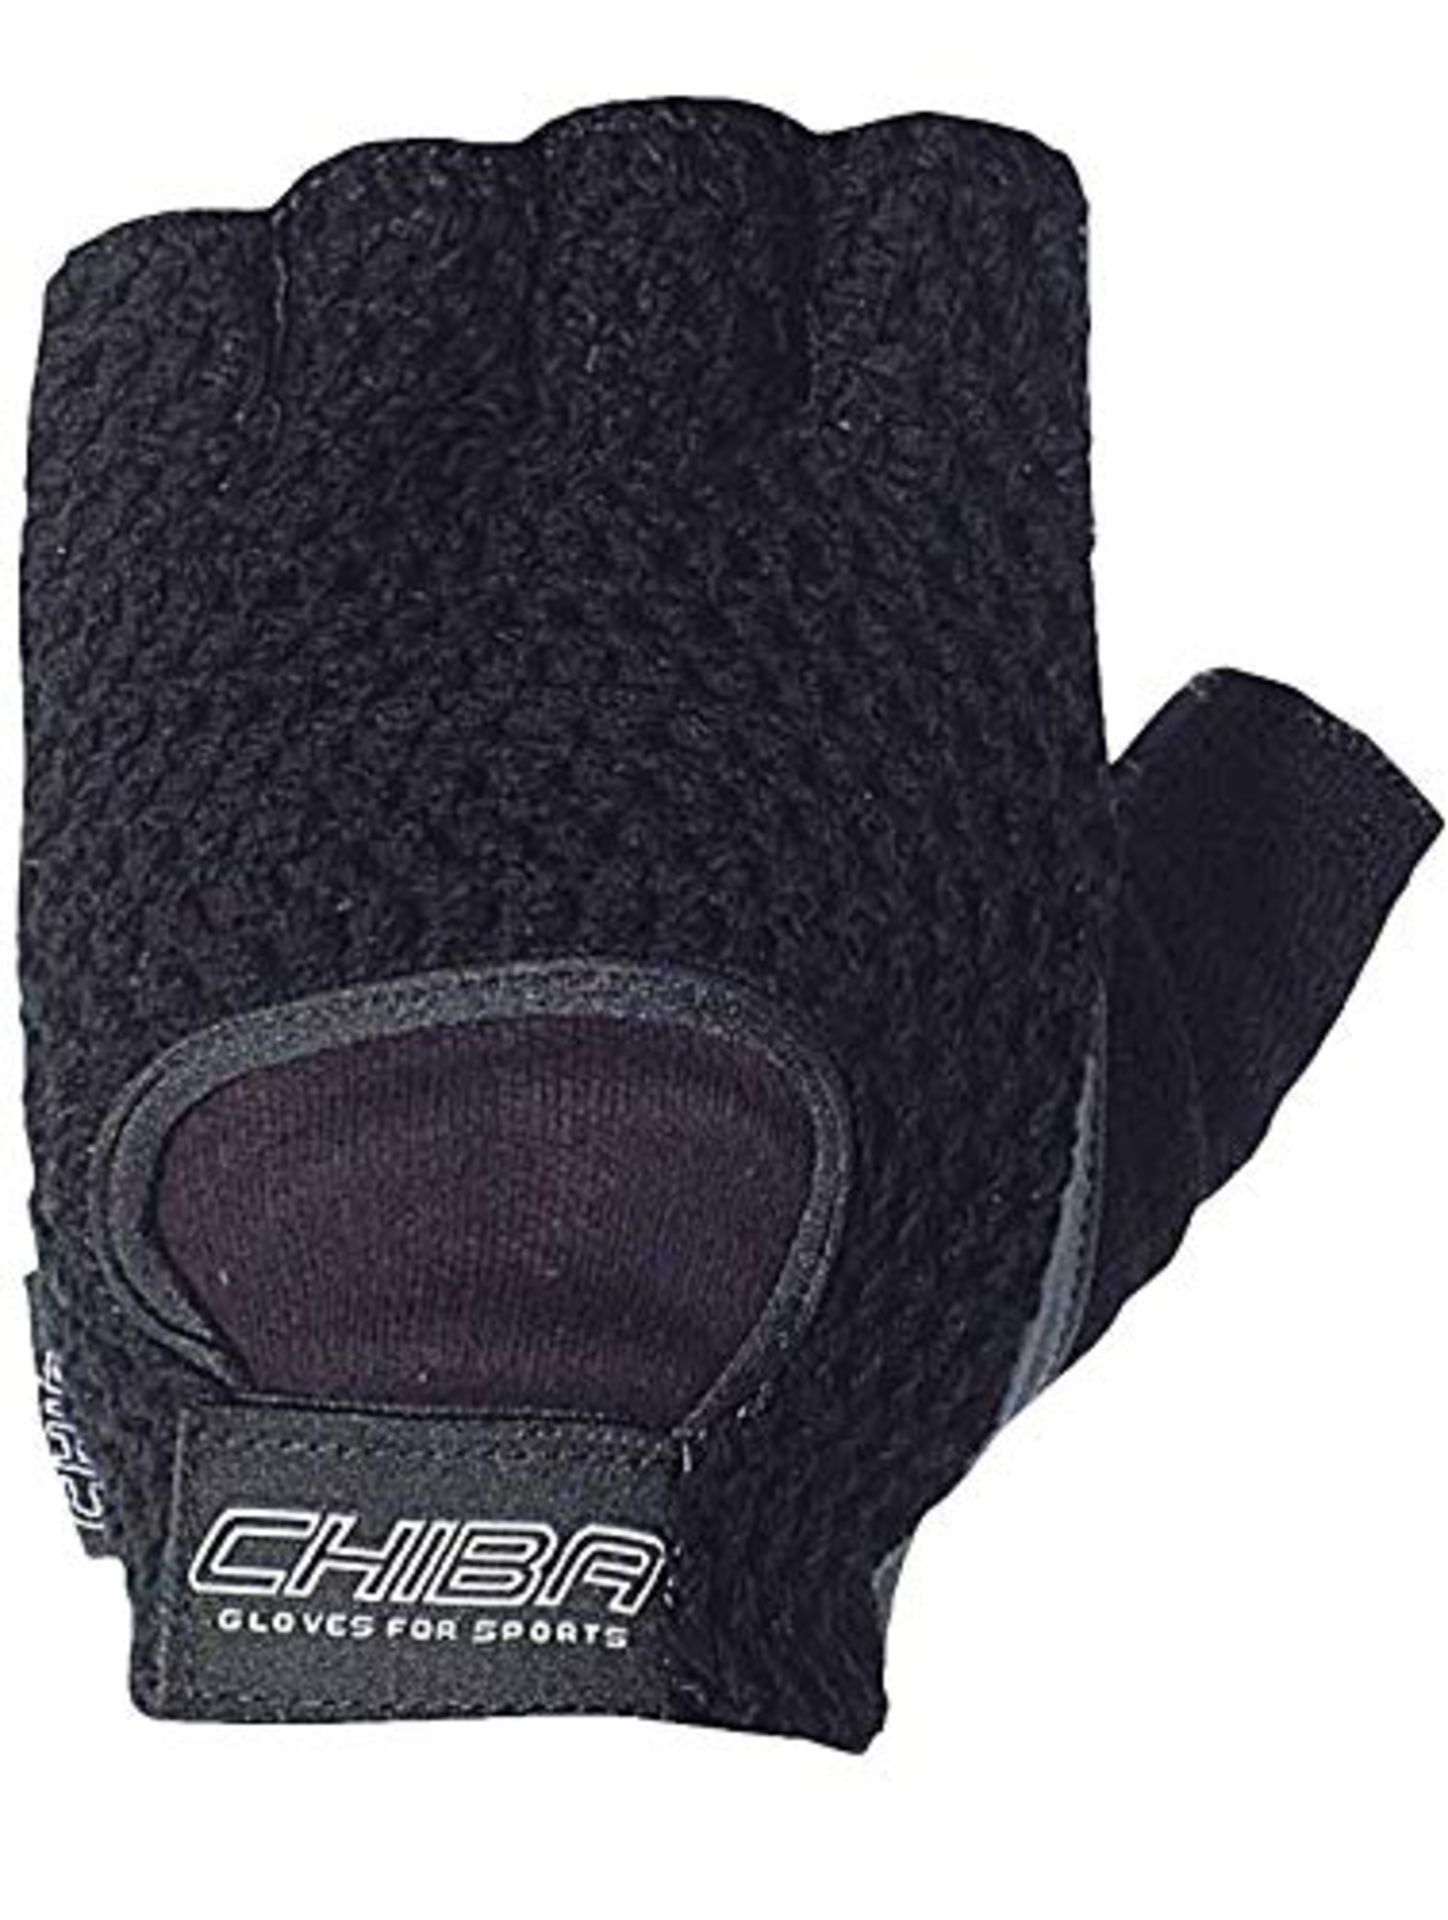 10 x Pairs of Men's Cycling Gloves | Total RRP £73.55 | See Description for Details - Image 5 of 6